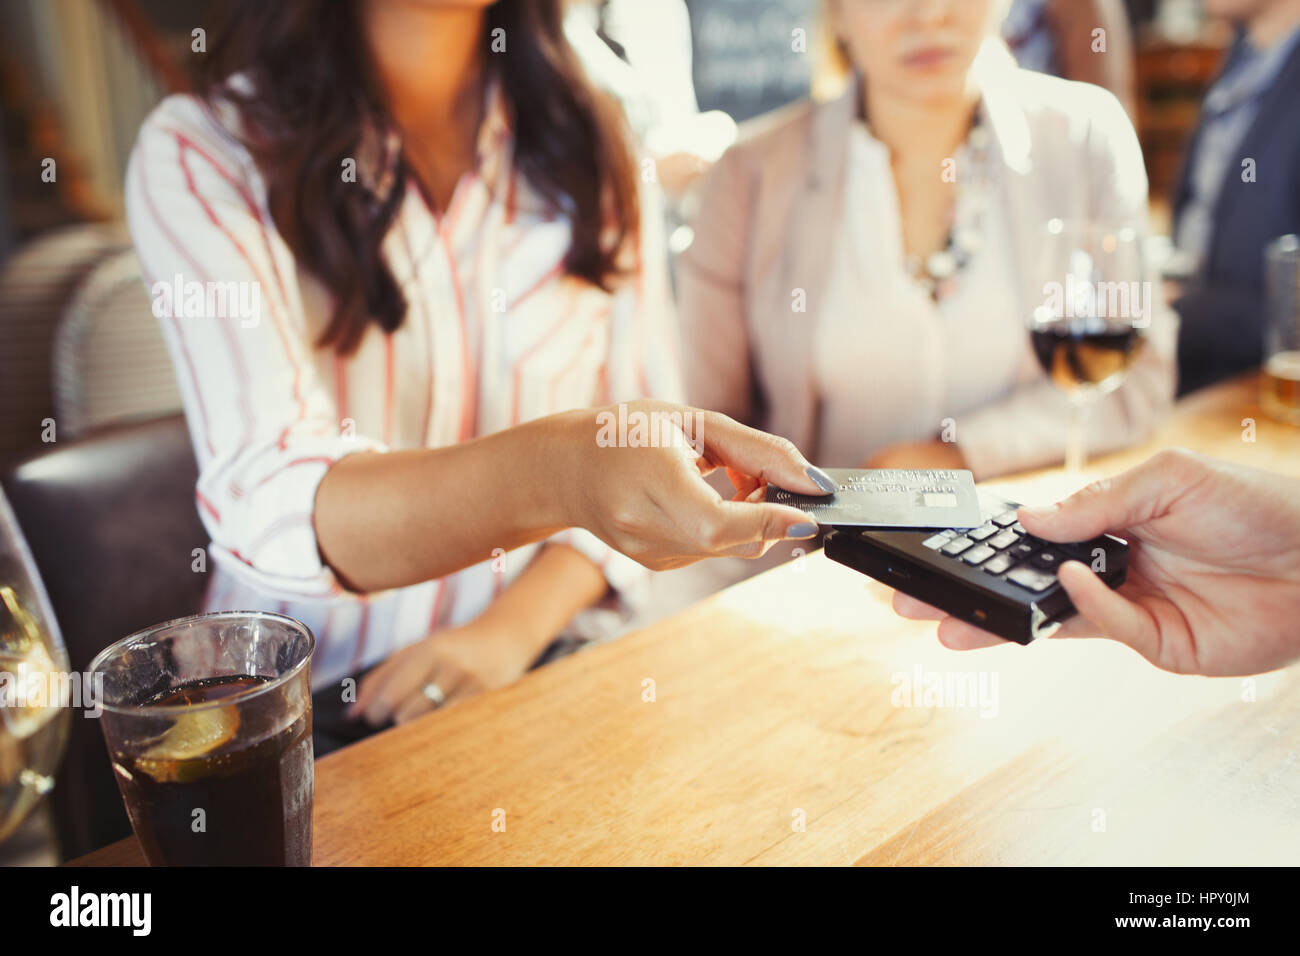 Woman paying bartender with credit card contactless payment at bar Stock Photo